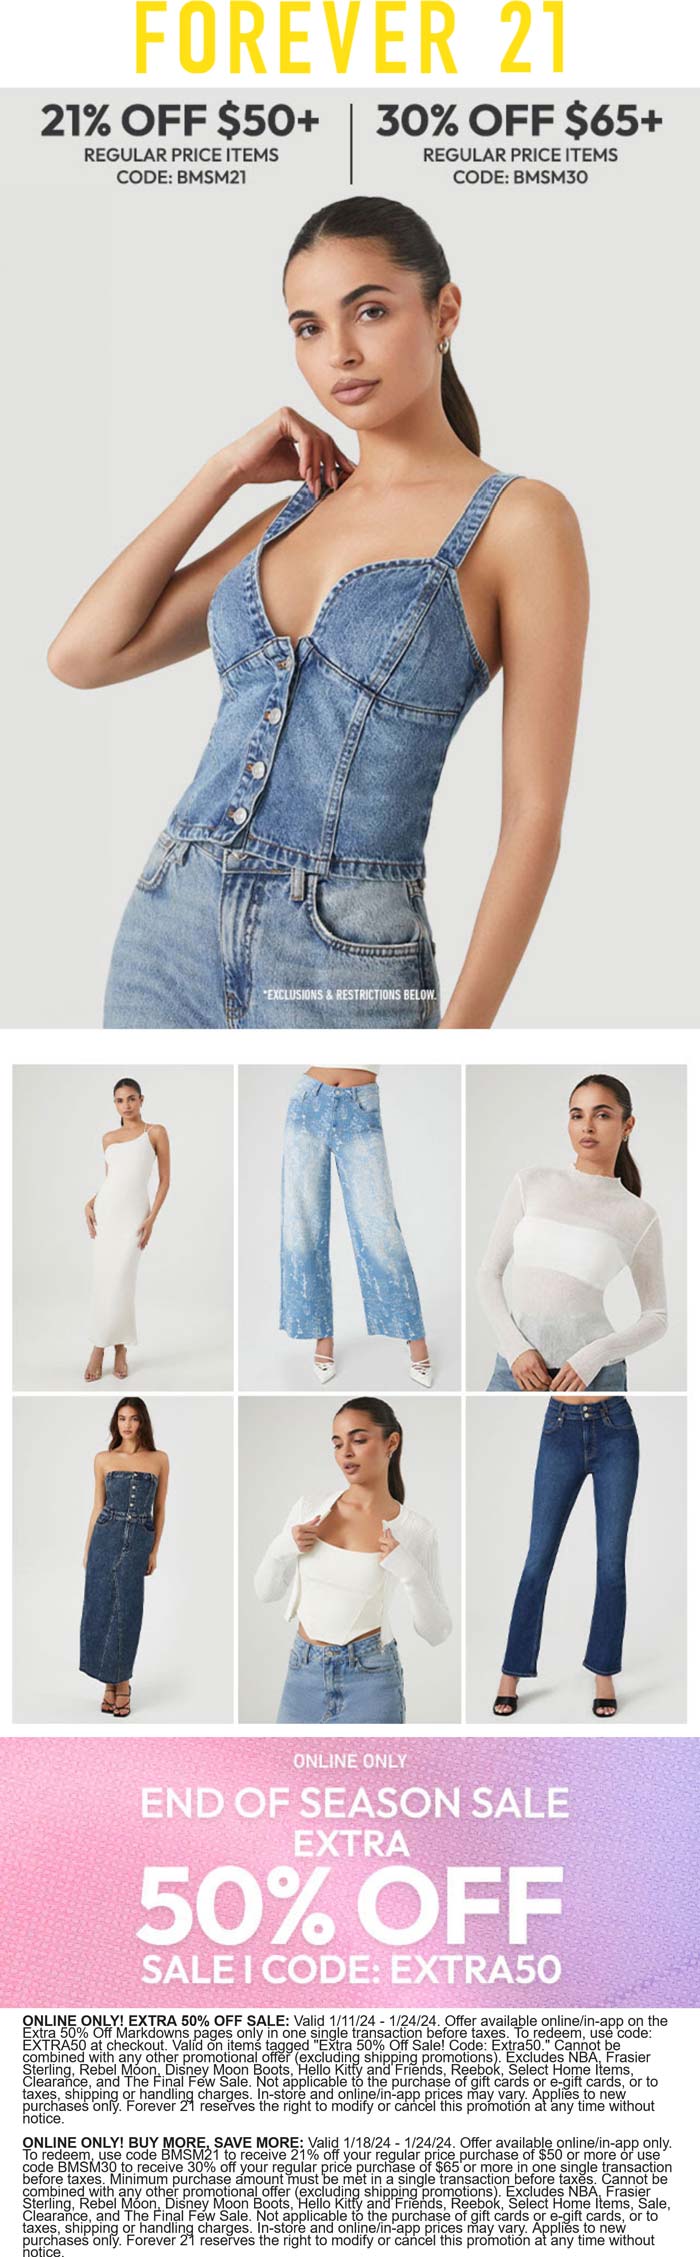 Forever 21 stores Coupon  Extra 50% off sale items & more online at Forever 21 via promo code Extra50 #forever21 